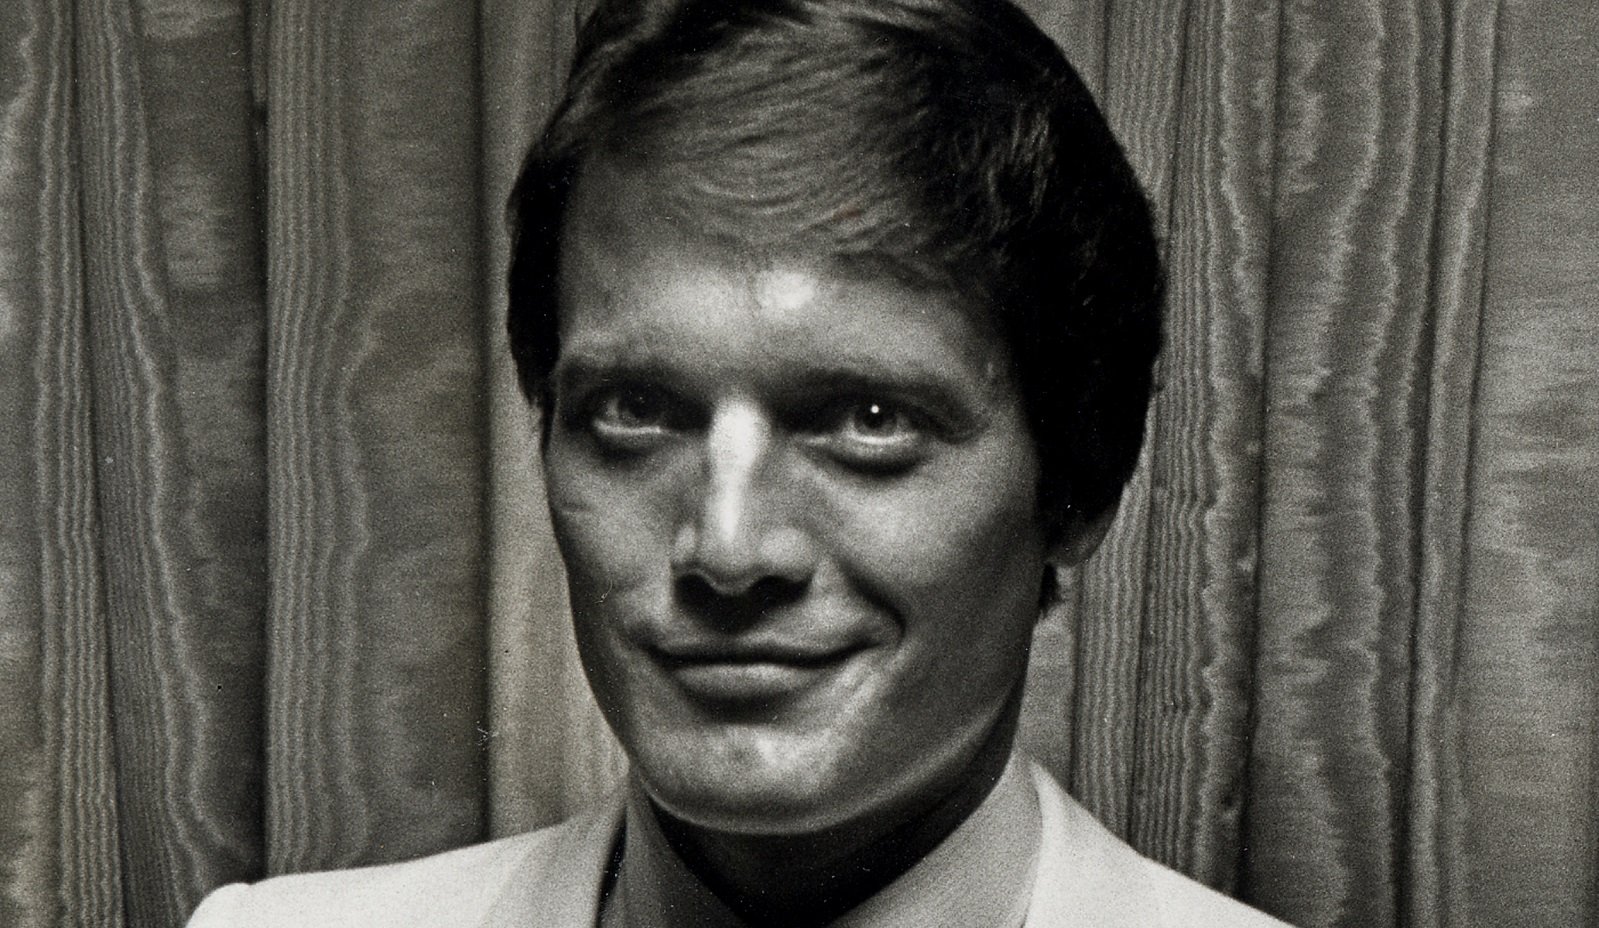 The Bold and the Beautiful star Michael Tylo, pictured here in 1982, has died at the age of 73